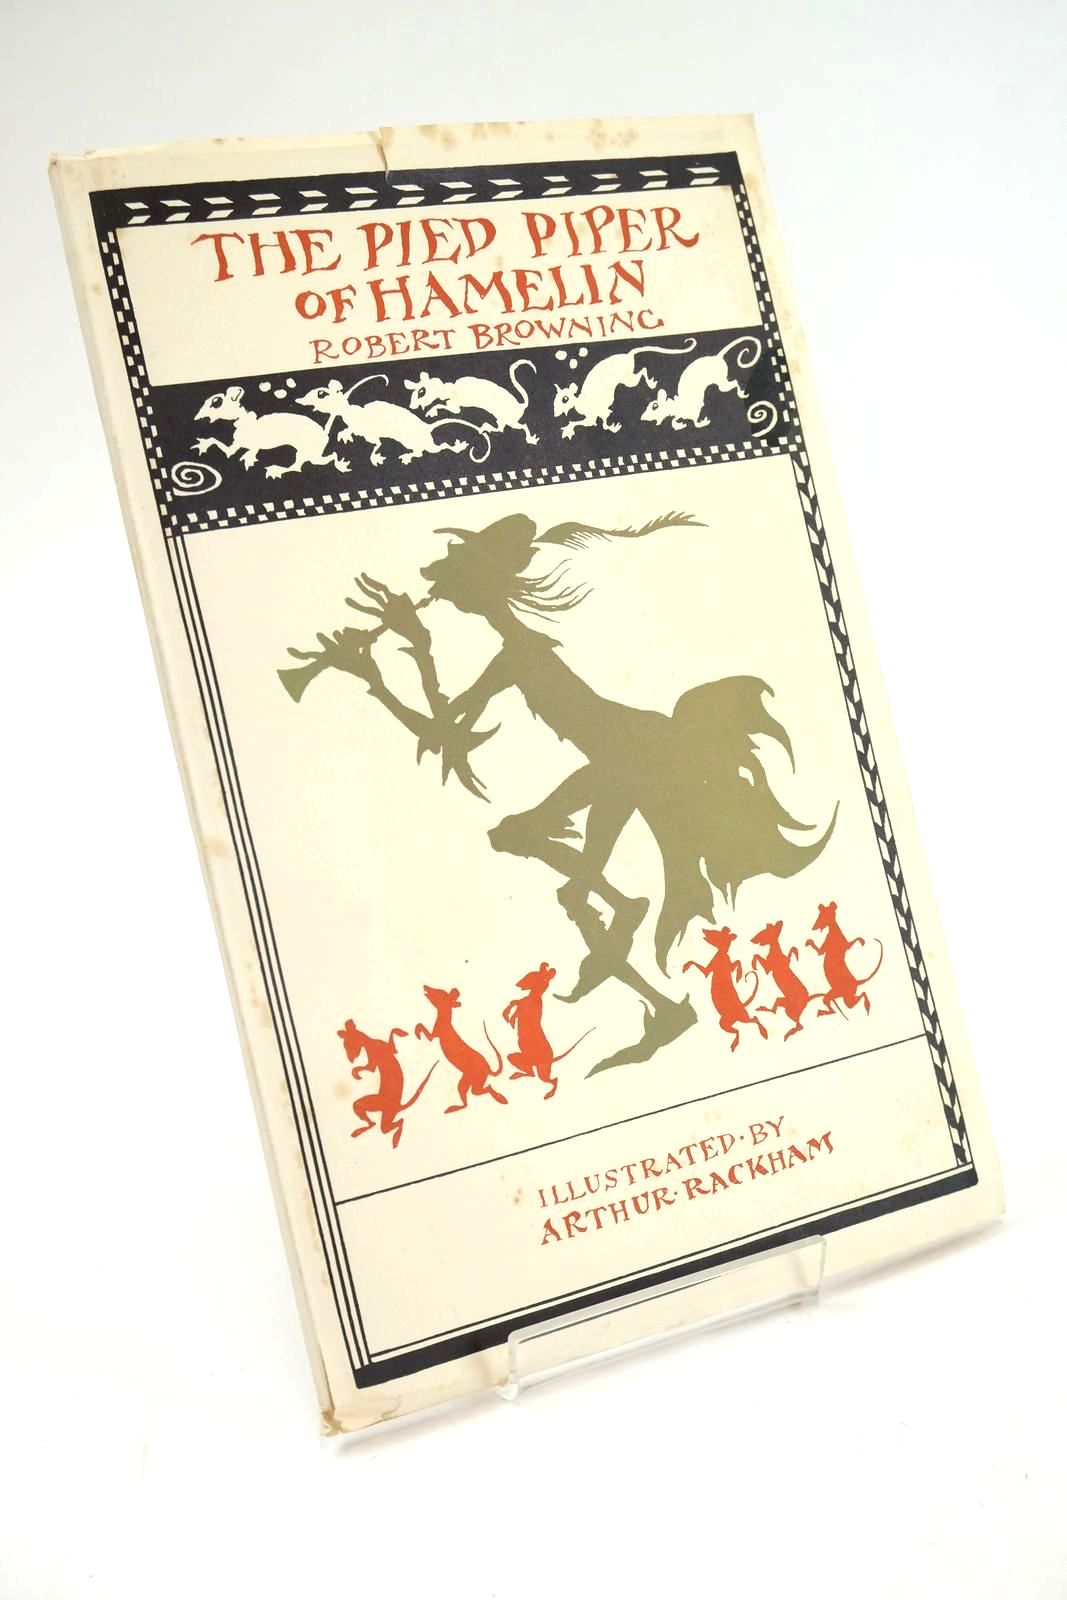 Photo of THE PIED PIPER OF HAMELIN written by Browning, Robert illustrated by Rackham, Arthur published by George G. Harrap &amp; Co. Ltd. (STOCK CODE: 1325014)  for sale by Stella & Rose's Books